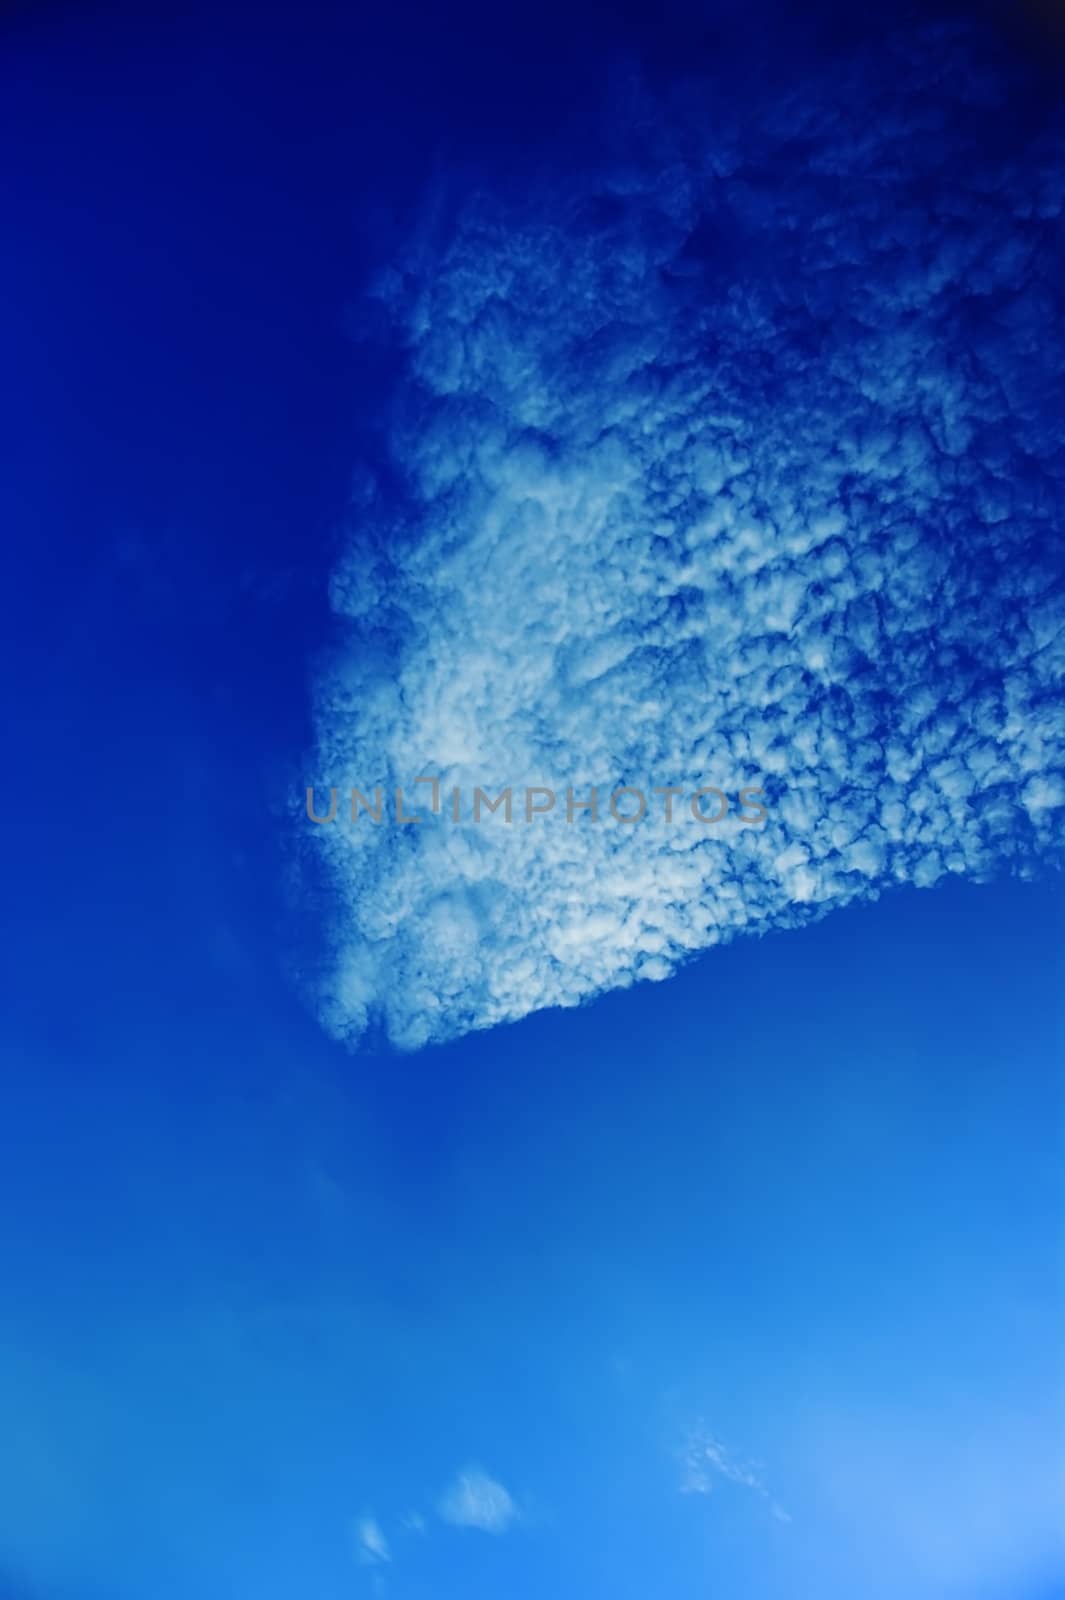 Sky clouds background  material by xfdly5